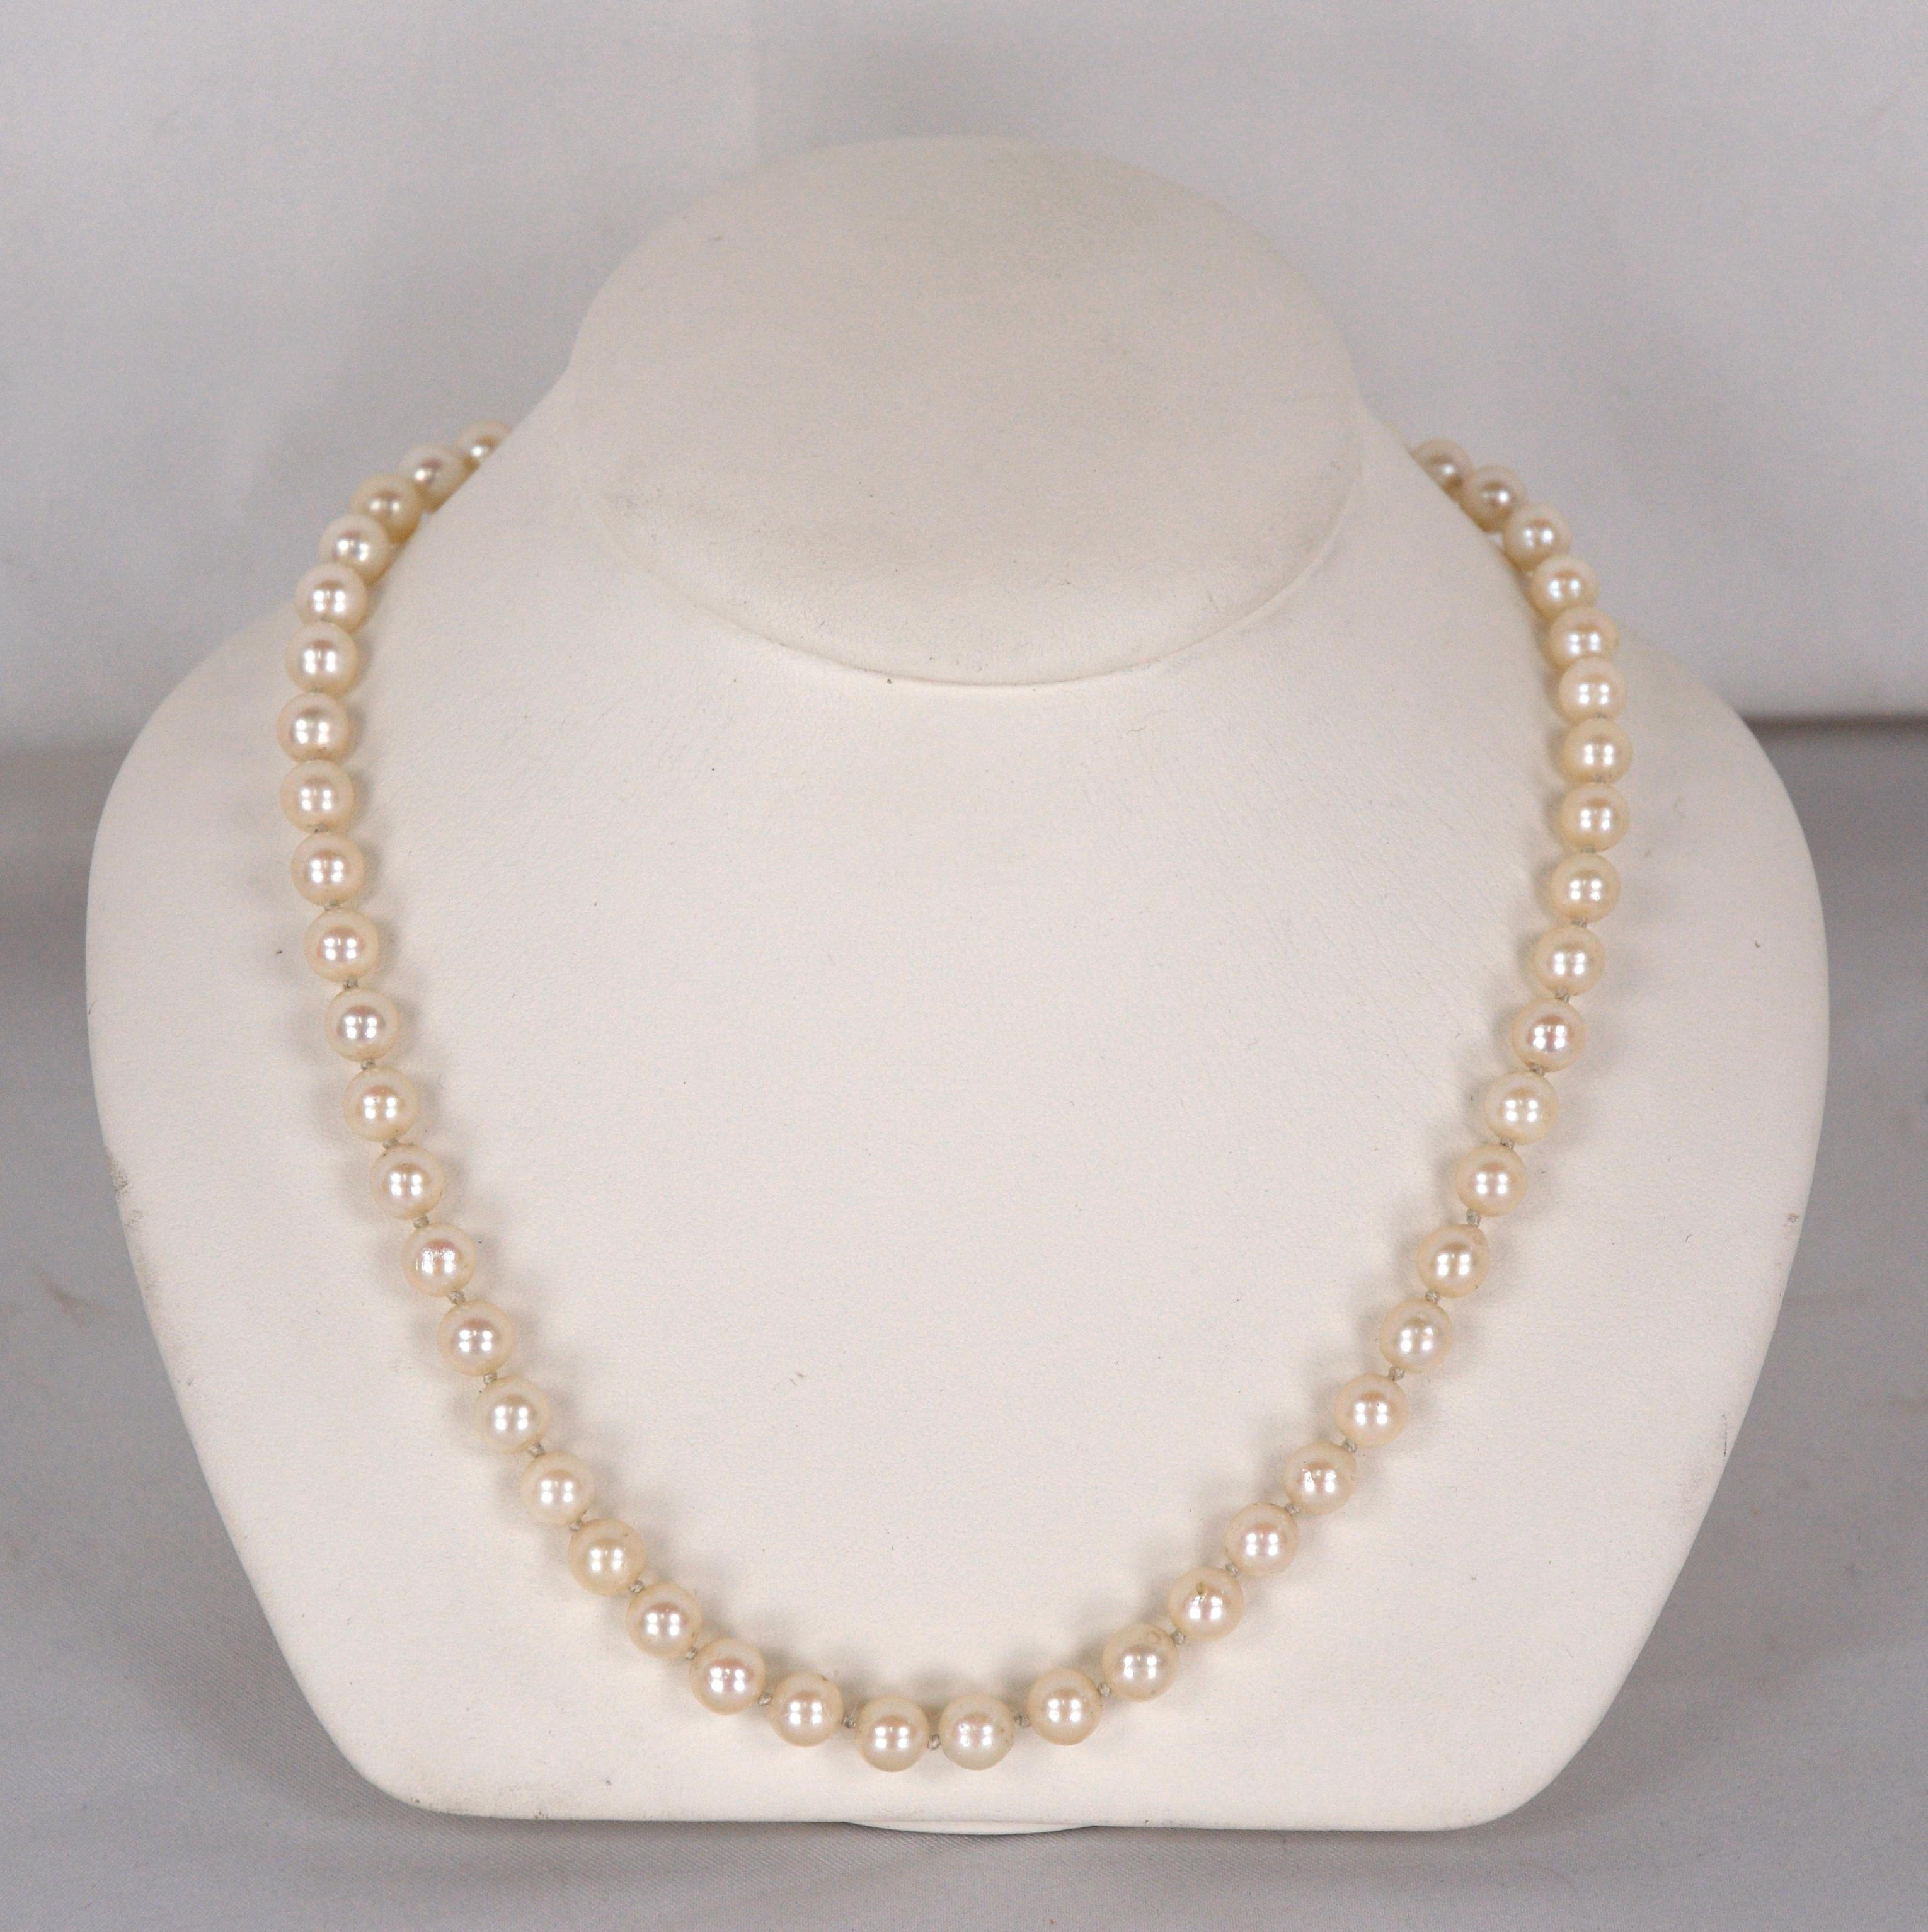 Brilliant pearl necklace with matching stud earrings. 14K white gold clasp on the necklace. Pearls are 7mm (.275in) in diameter. Gorgeous slightly pink coloration. Earrings are 14K yellow post and backs.